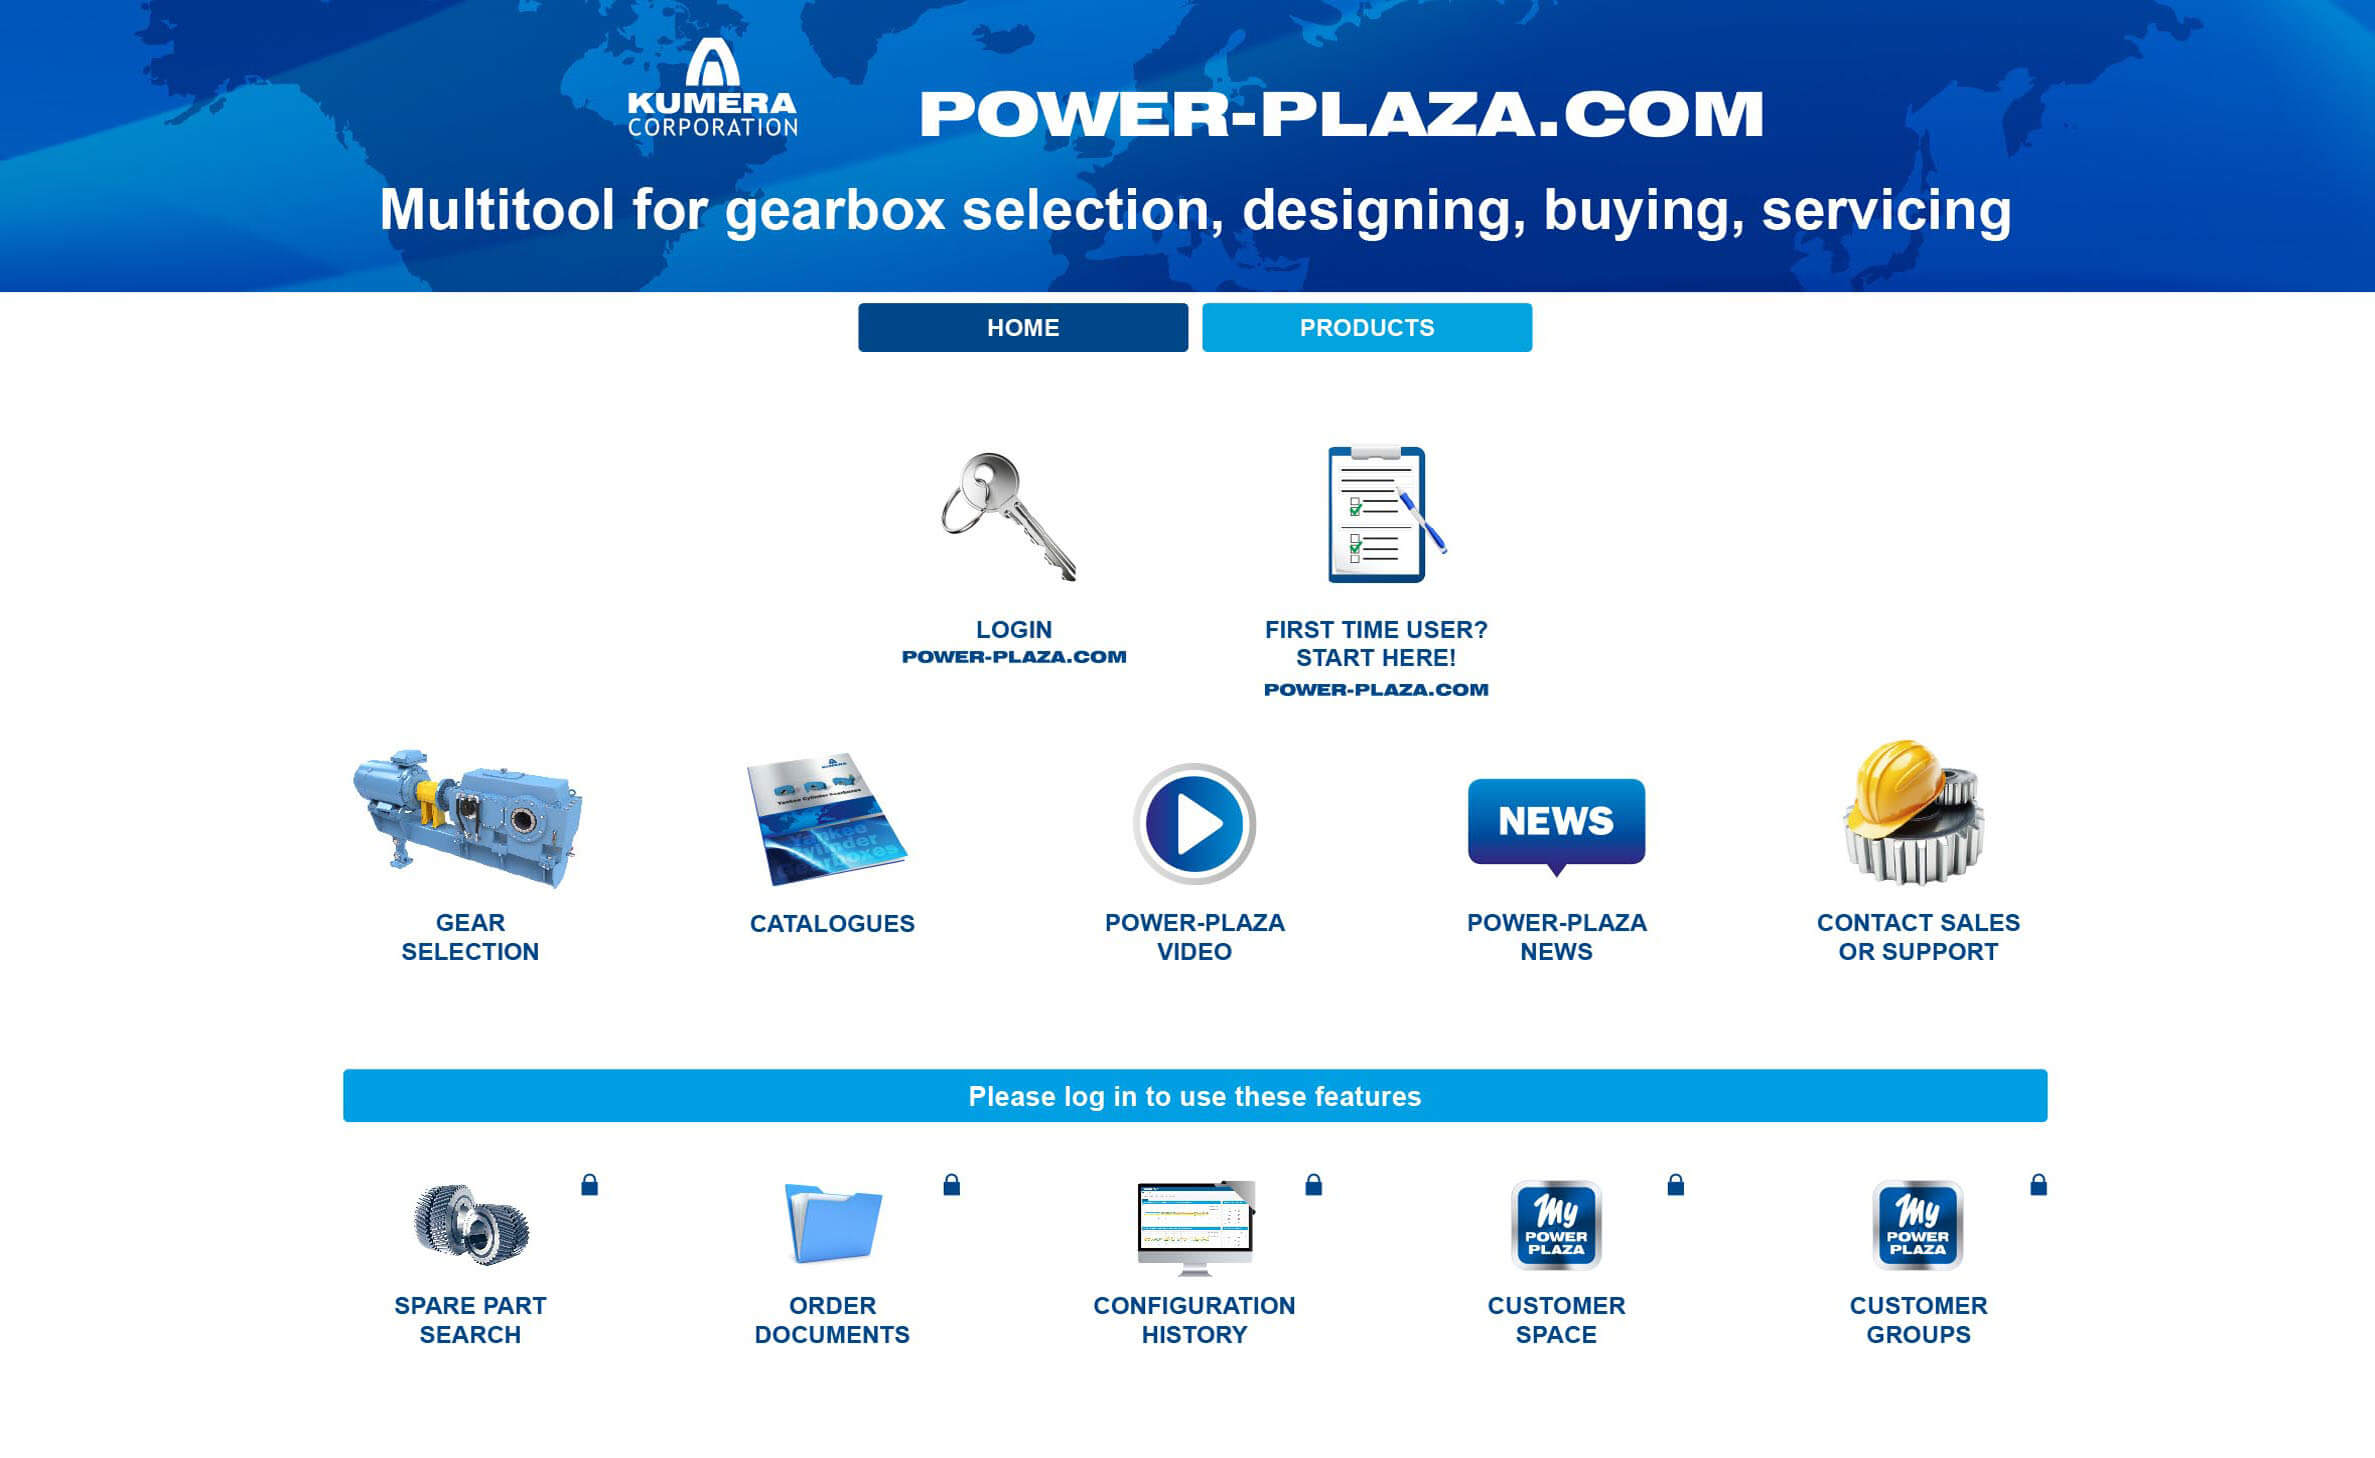 Kumera Power Plaza - Online Gearbox Selection Portal. Kumera Power-Plaza is the online market place for Kumera mechanical transmission products and associated spare parts. www.power-plaza.com